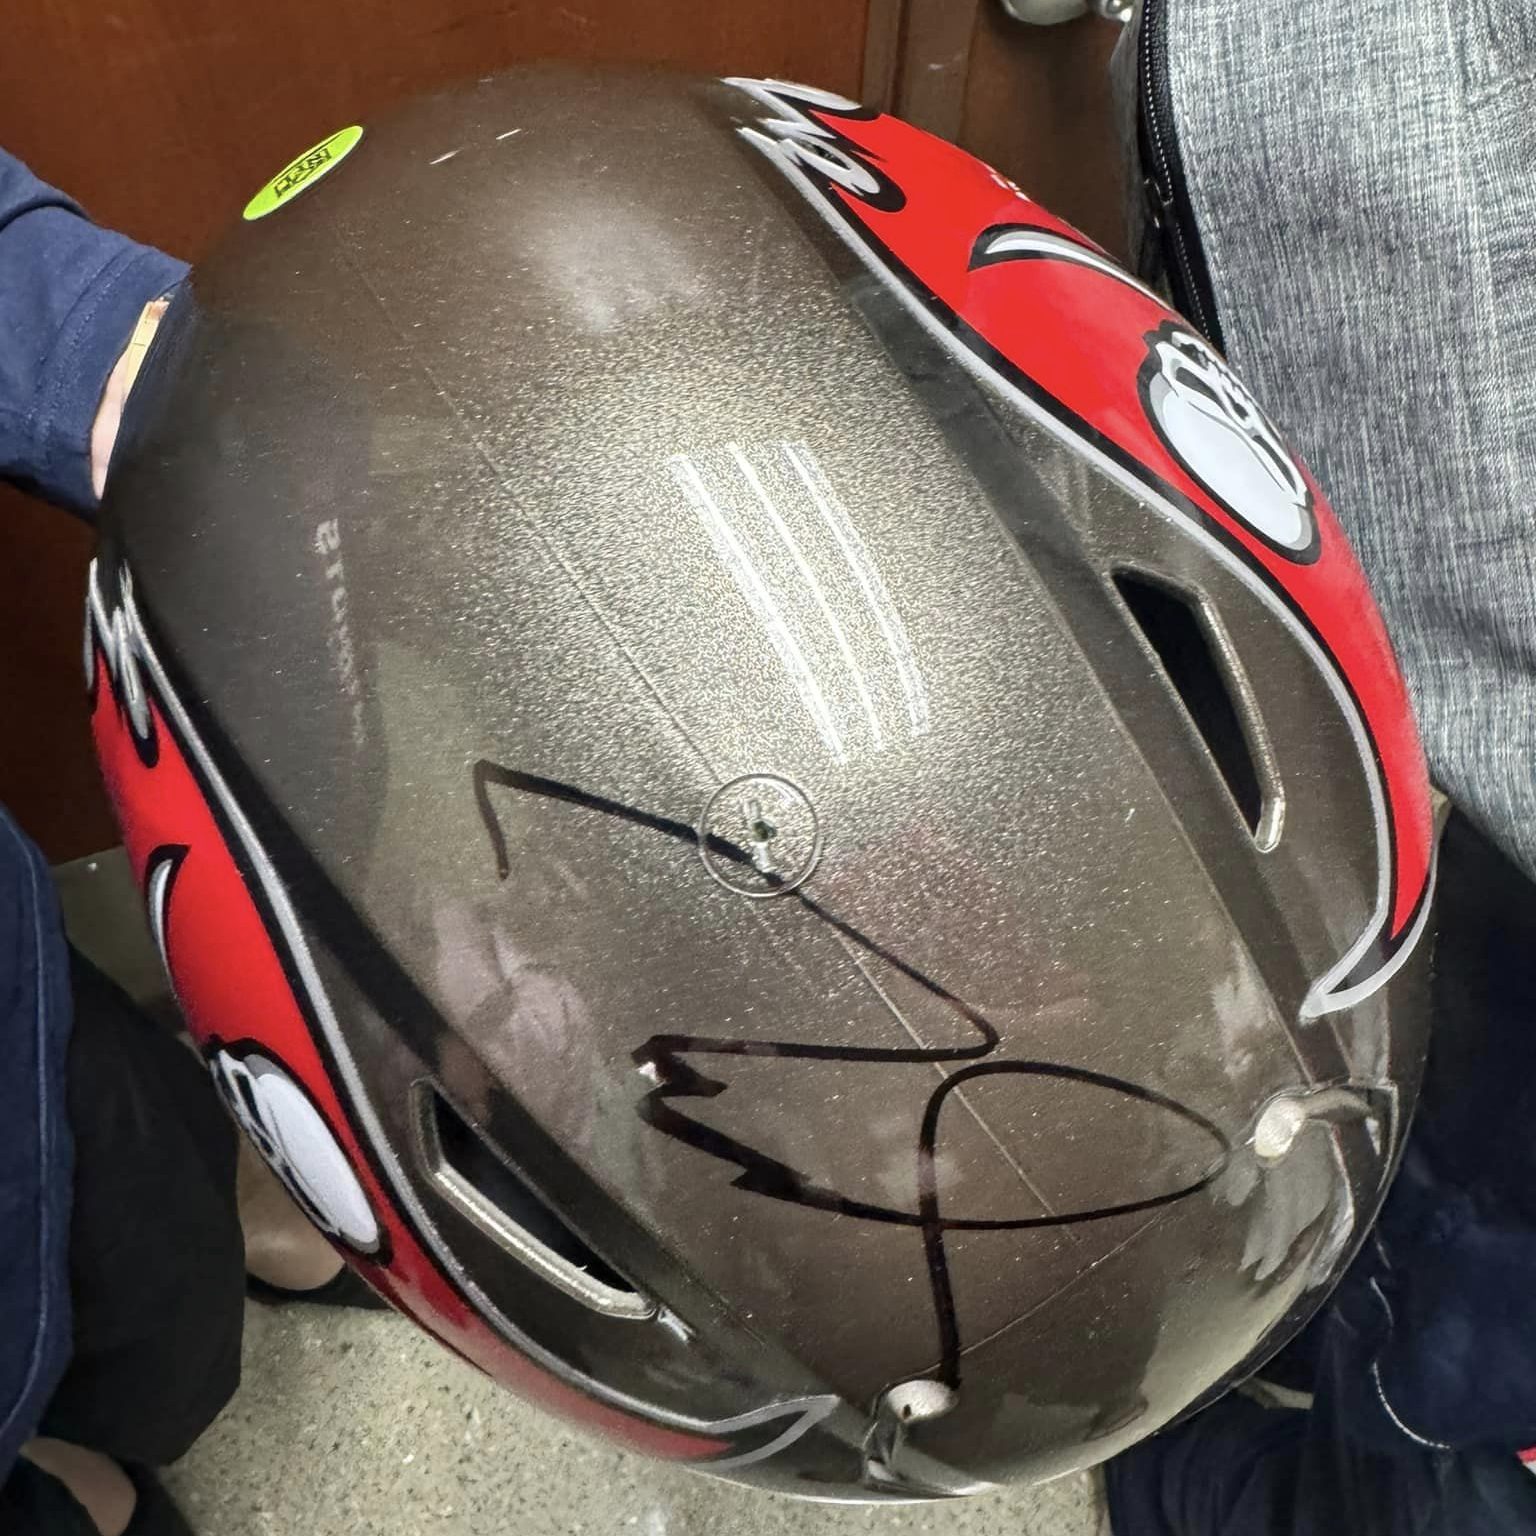 A Tom Brady-worn helmet, which the owner complained was sloppily signed by the former QB